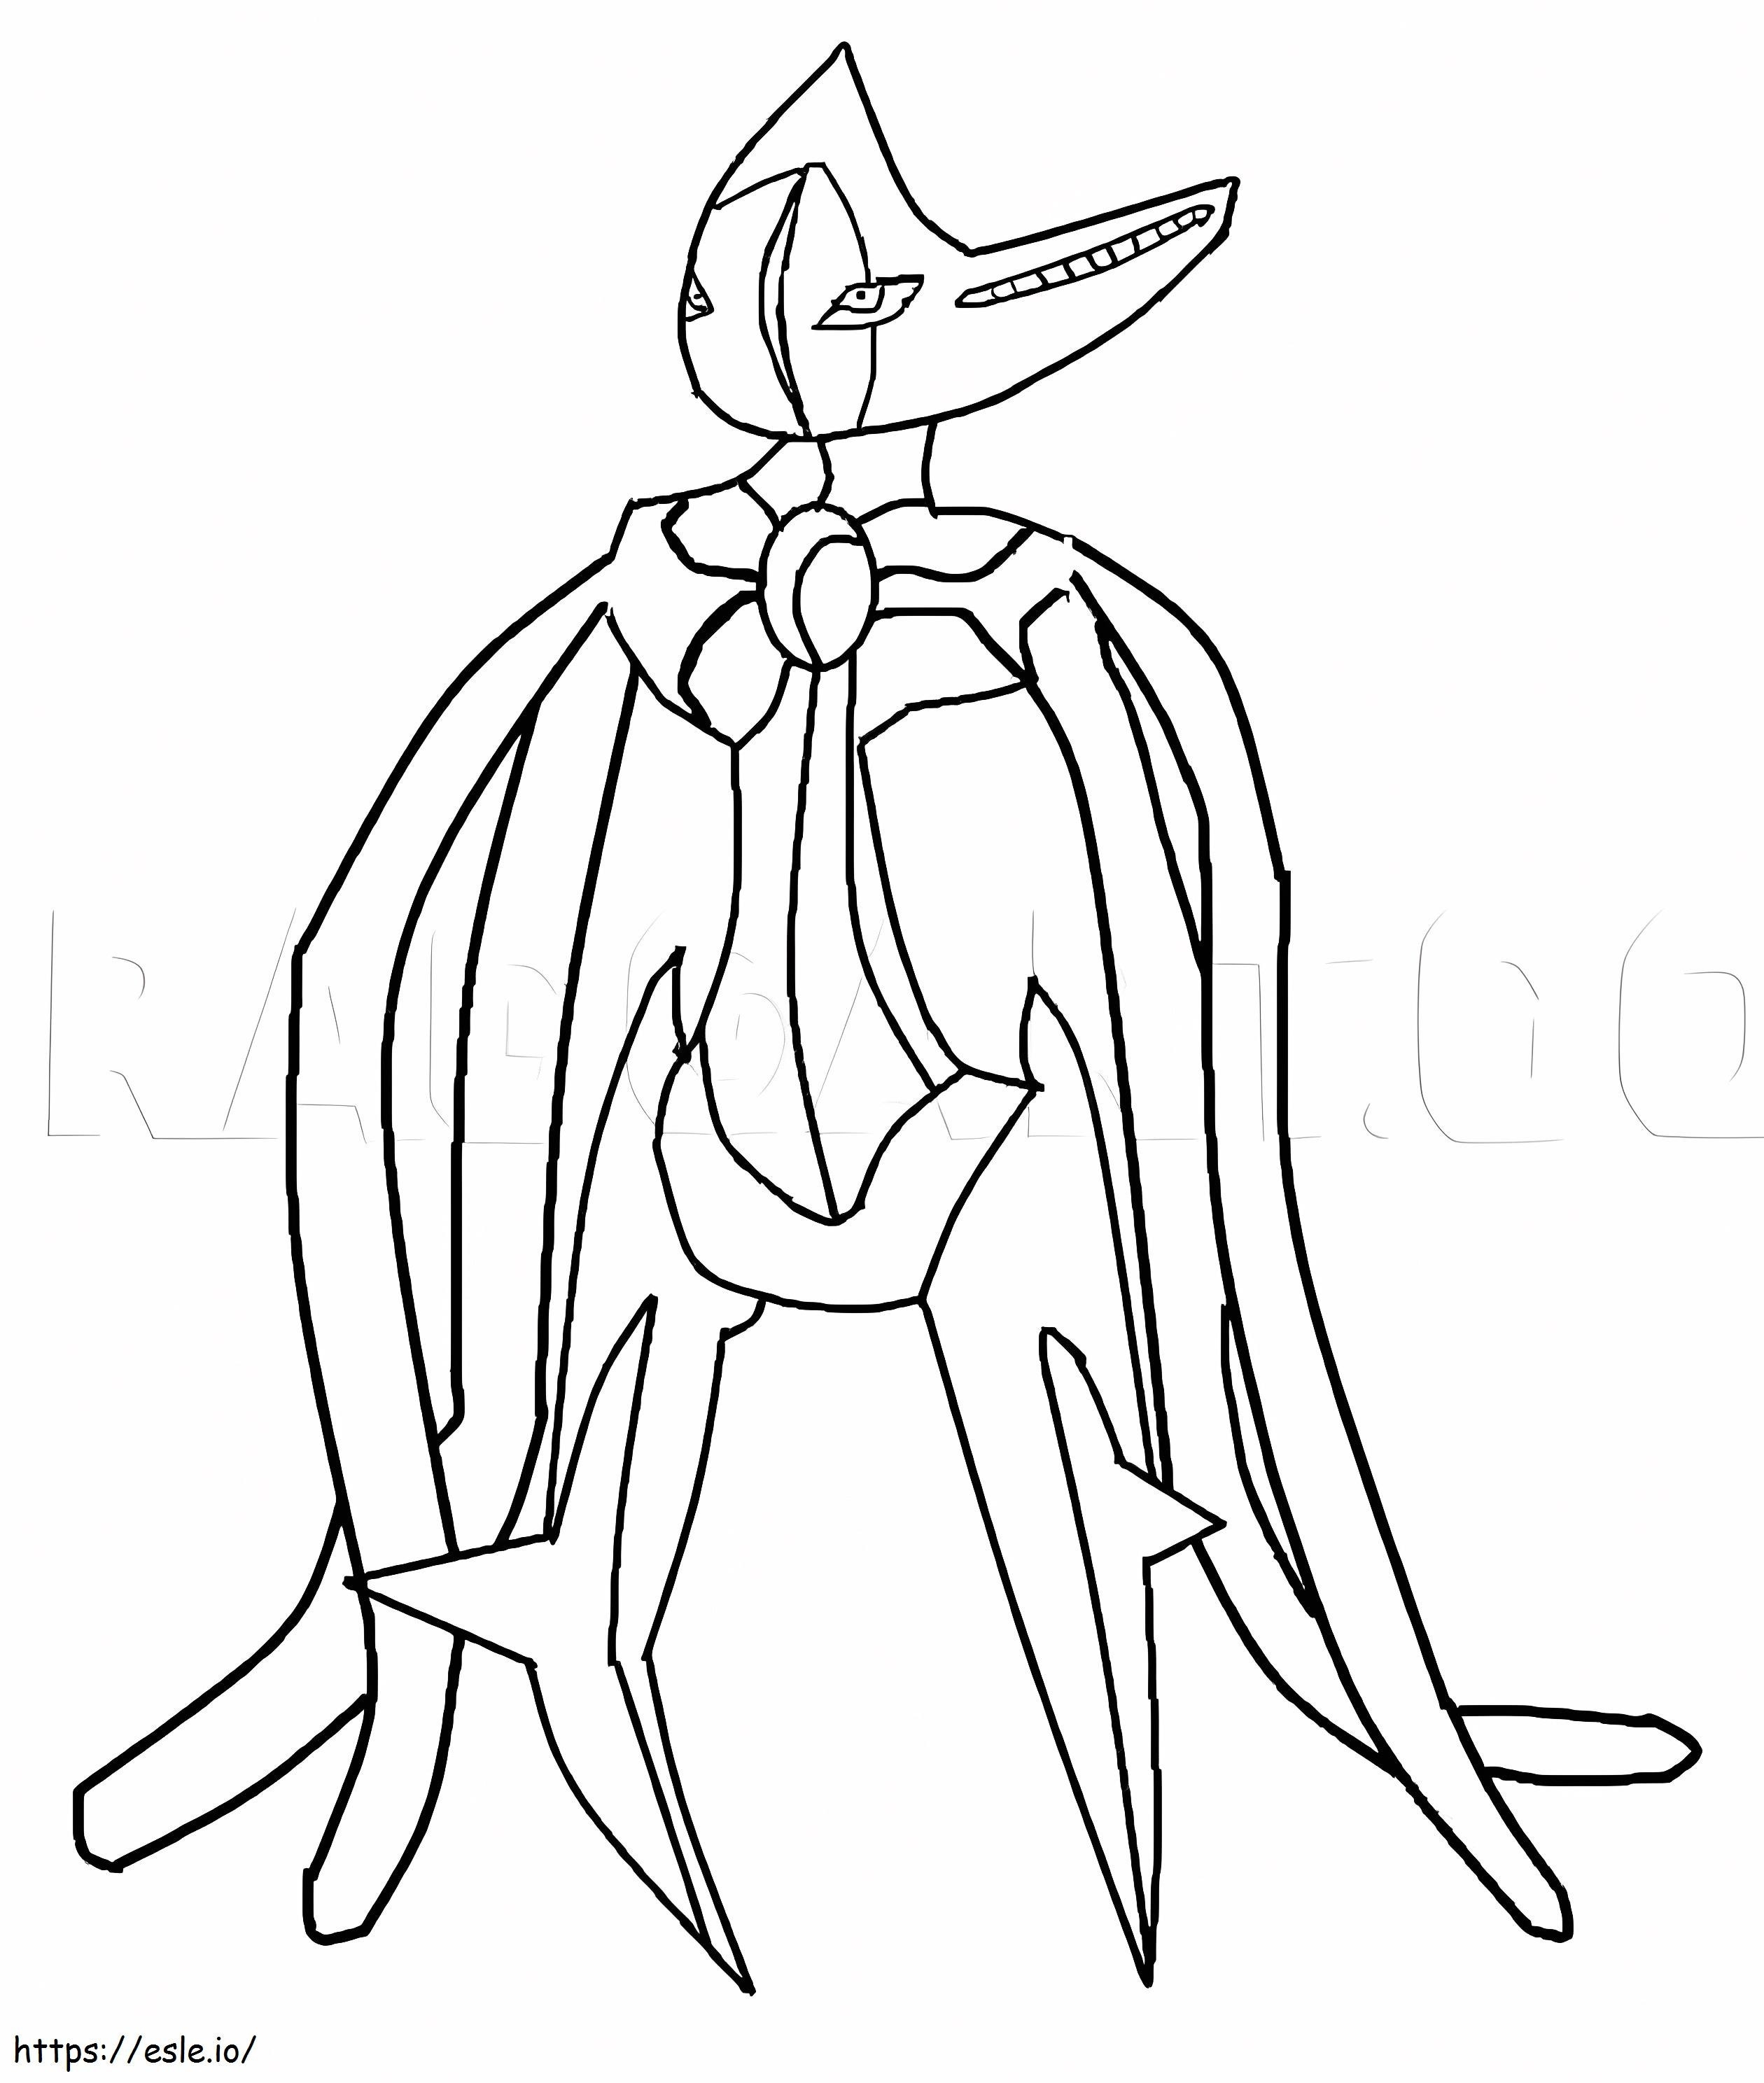 Pokemon Deoxys In Attack Form coloring page